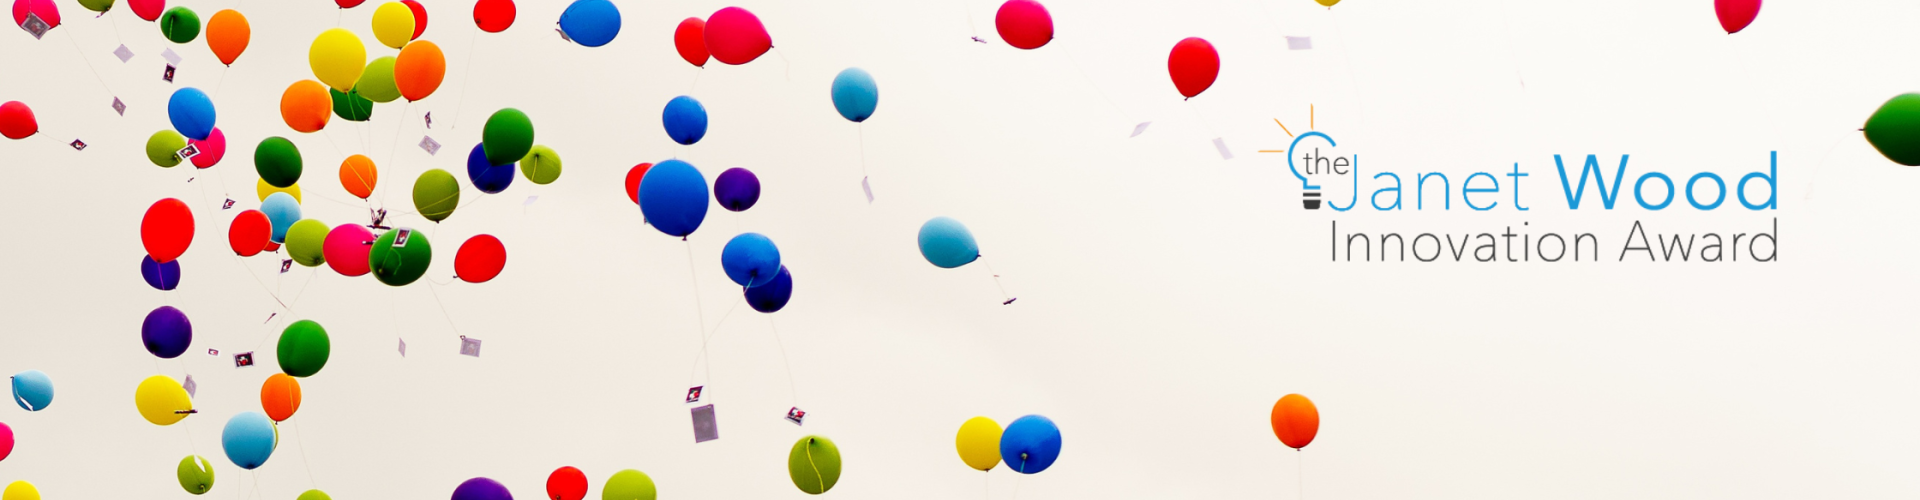 Celebratory balloons in the sky with Janet Wood Innovation Award logo overlaid